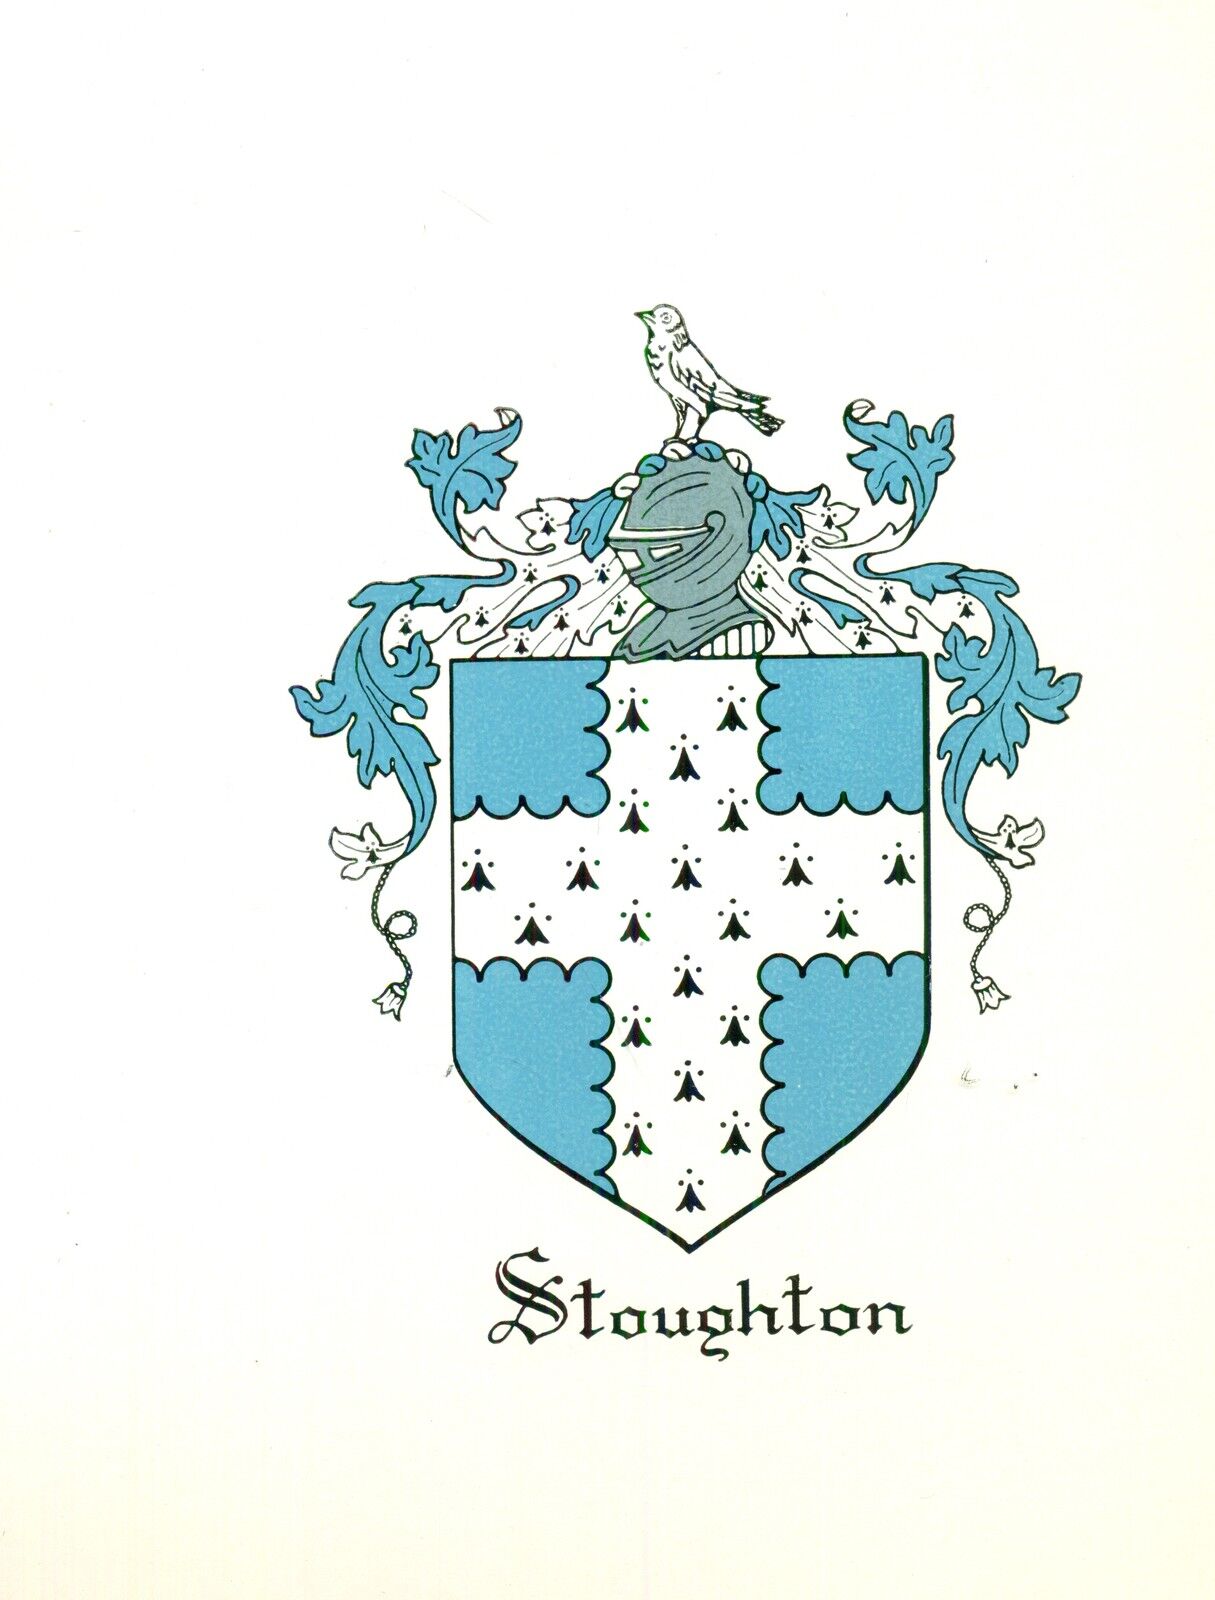 Great Coat Of Arms Stoughton Family Crest Genealogy, Would Look Great Framed!